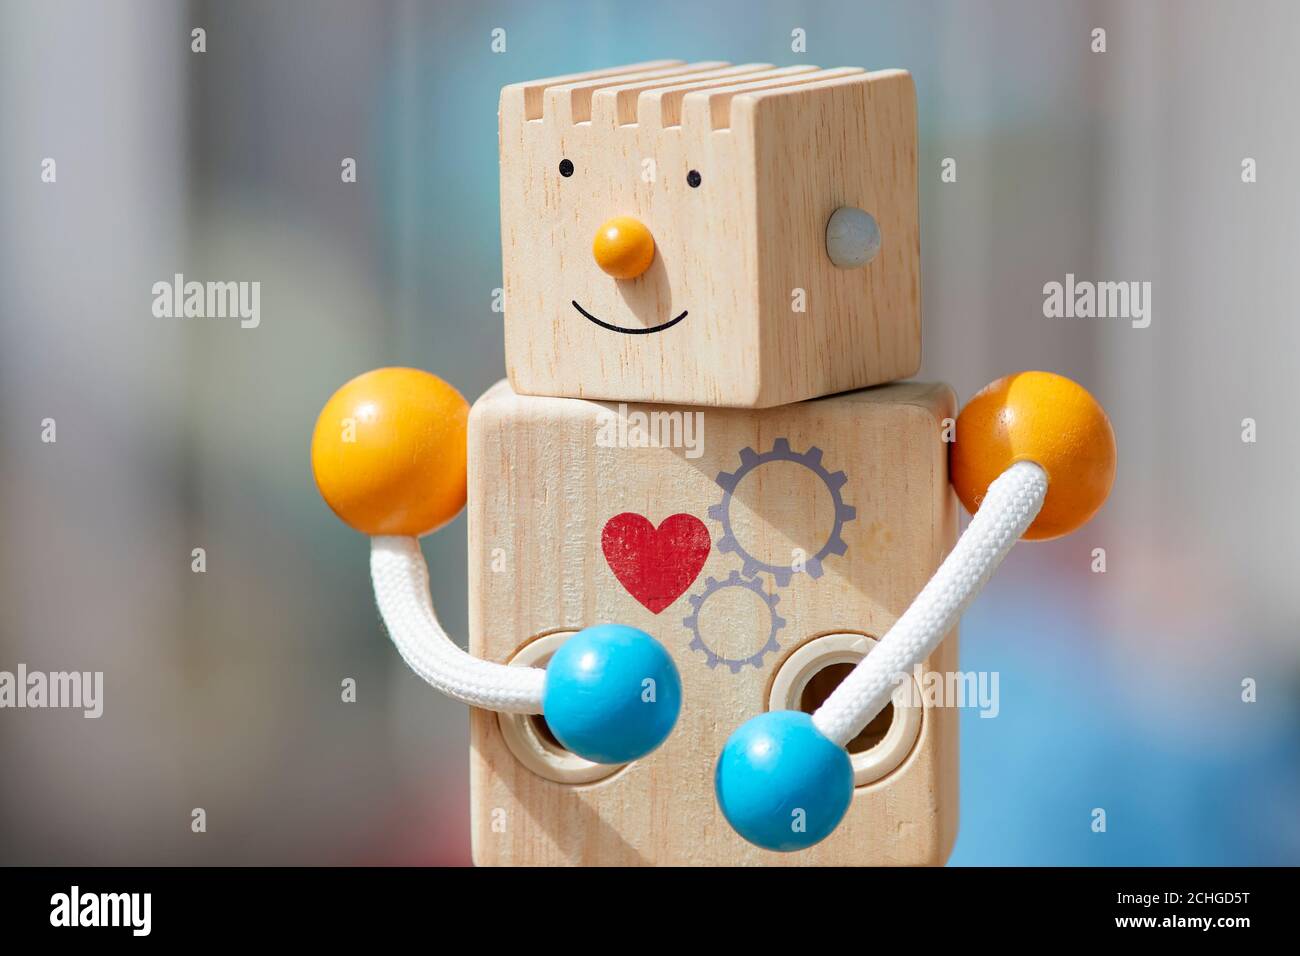 Wooden toy robot with red heart and smile. Defocused background. Stock Photo